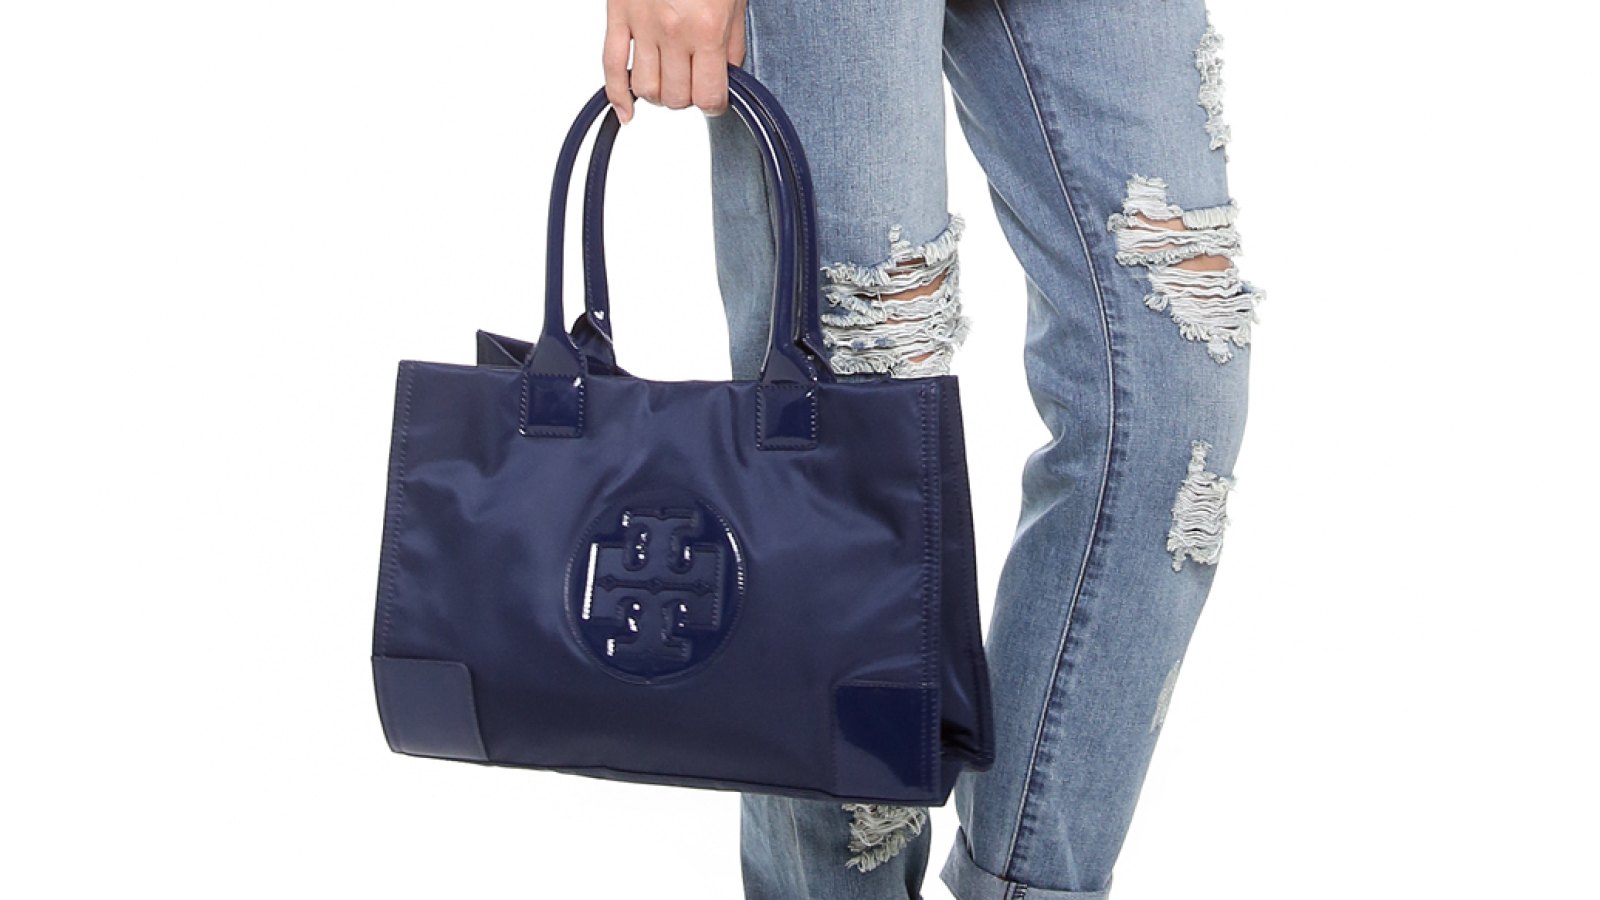 This Tory Burch tote is the perfect size for ladies on the go